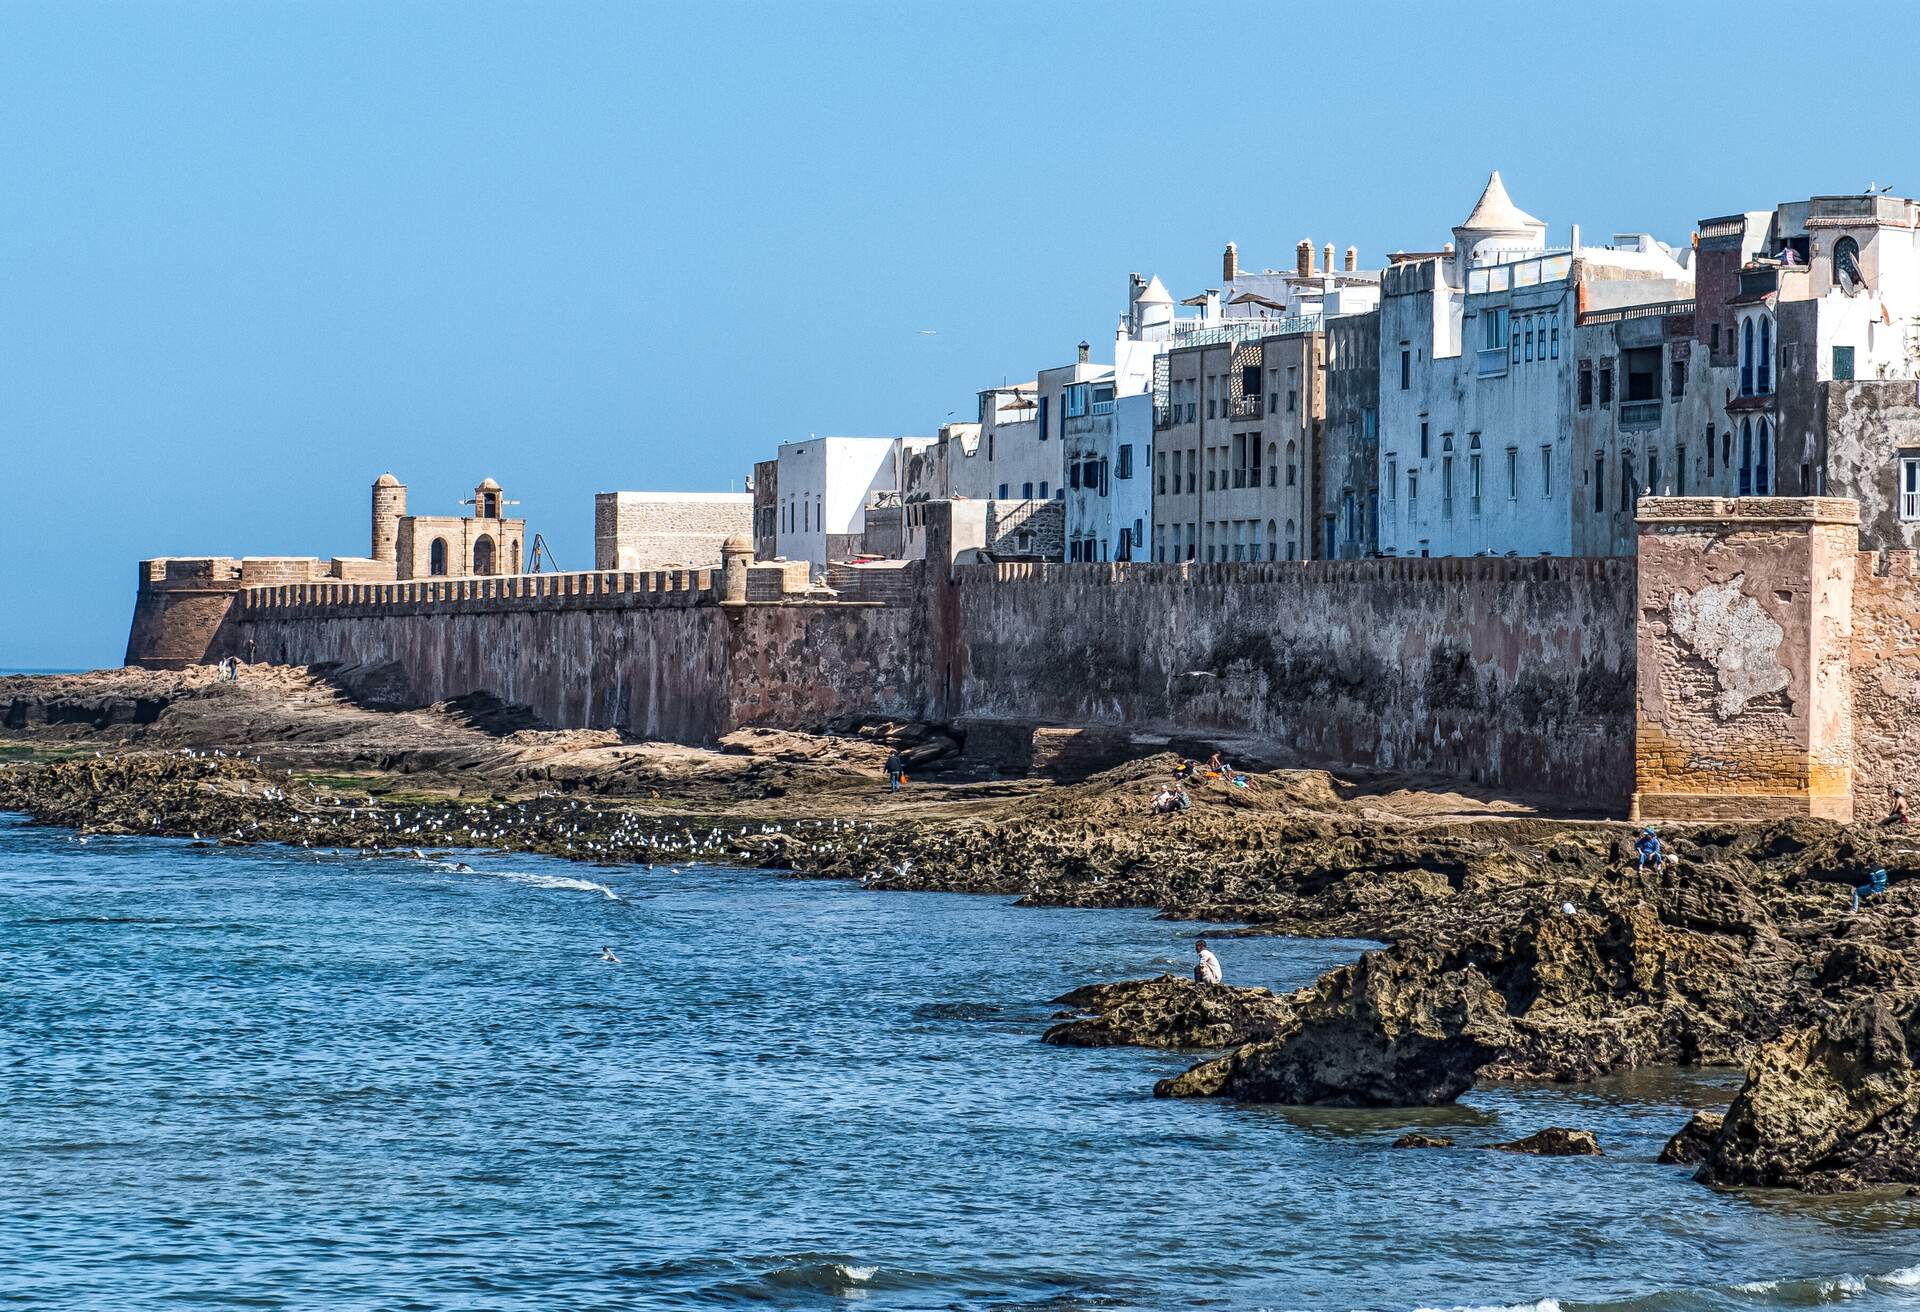 The ancient ramparts of the coastal town of Essaouira, Morocco. The fortress walls surround the old medina of Essaouira. The town is famous for its blue colours, especially the blue fishing boats.; Shutterstock ID 1048165273